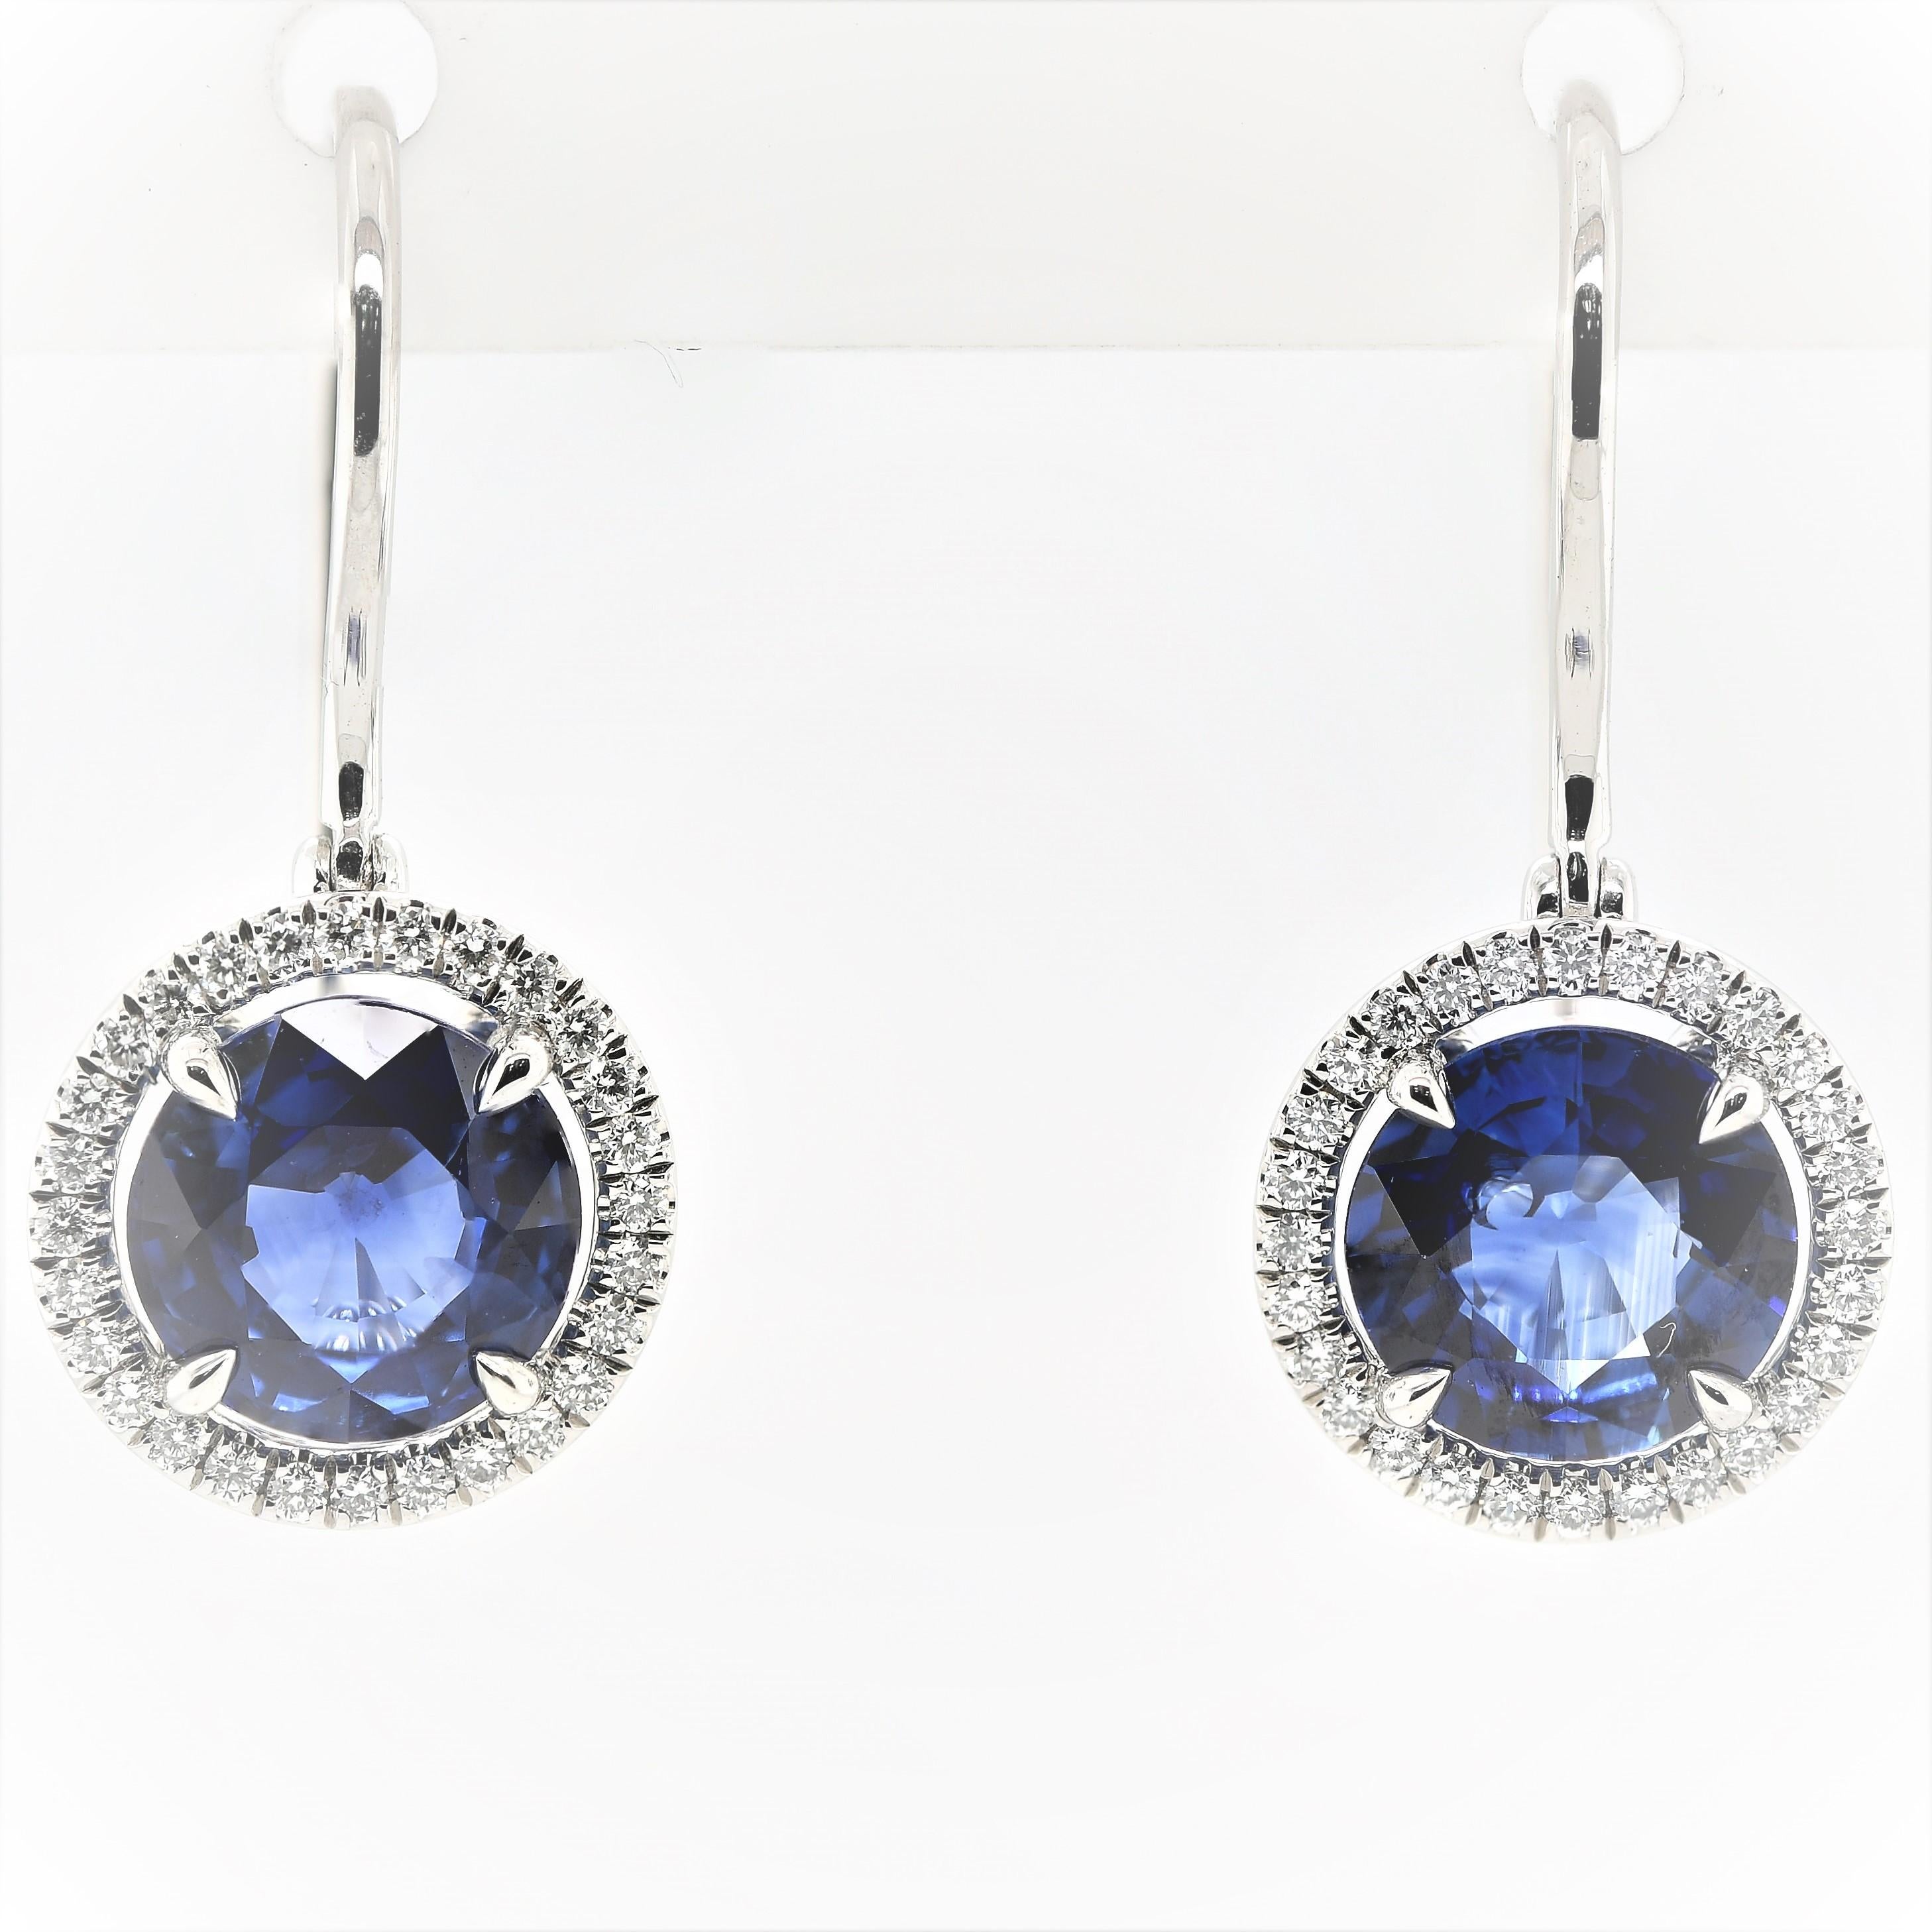 These Sapphire and Diamond Halo Earrings are a must have for any wardrobe! With over 2.10 carats in Sapphires and 56 Diamonds all set in Platinum, they will surely complement any outfit!